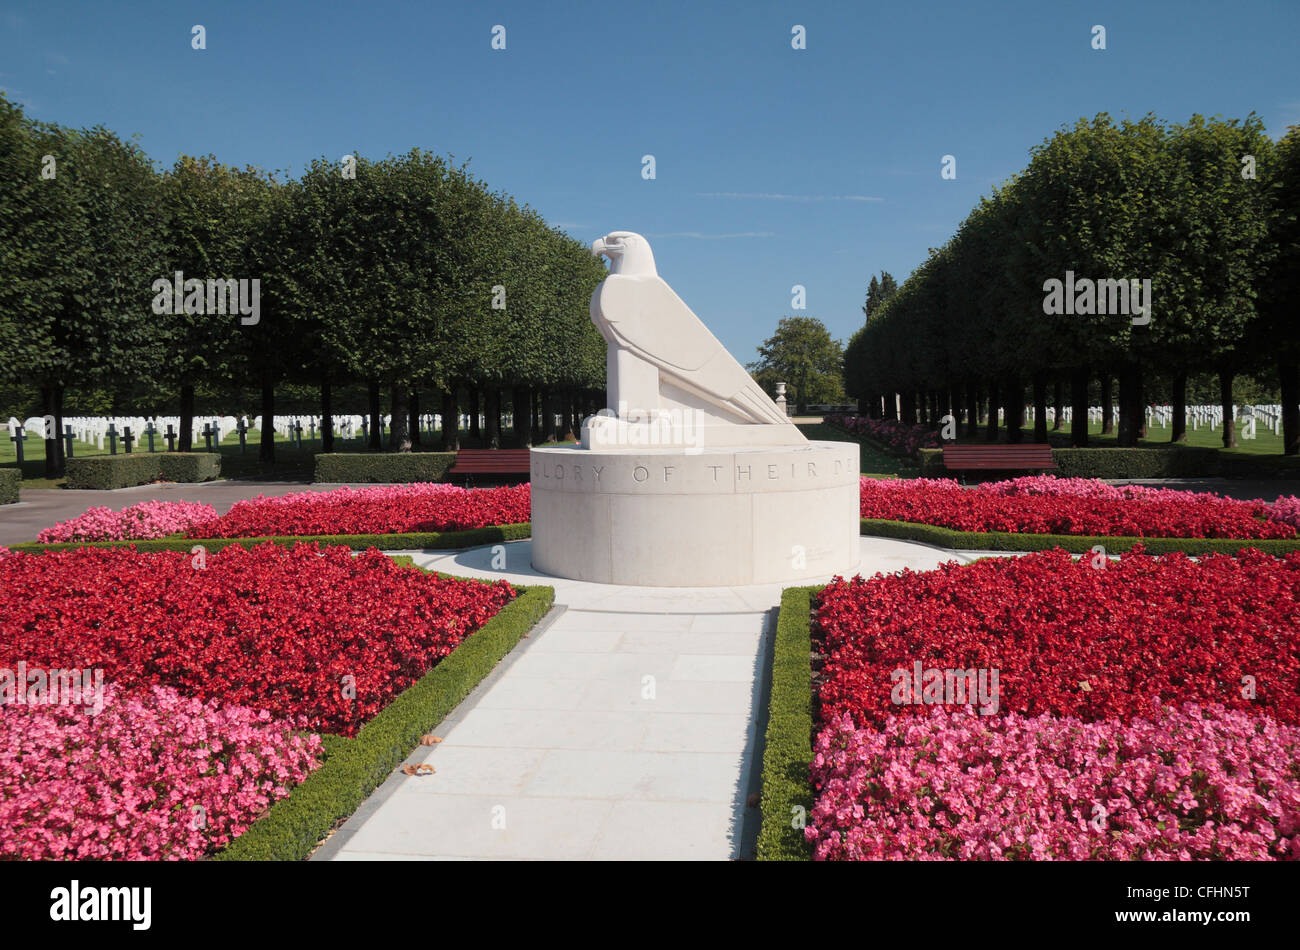 American eagle sculpture at the centre of a sundial in the St. Mihiel American Cemetery and Memorial, Thiaucourt, France. Stock Photo